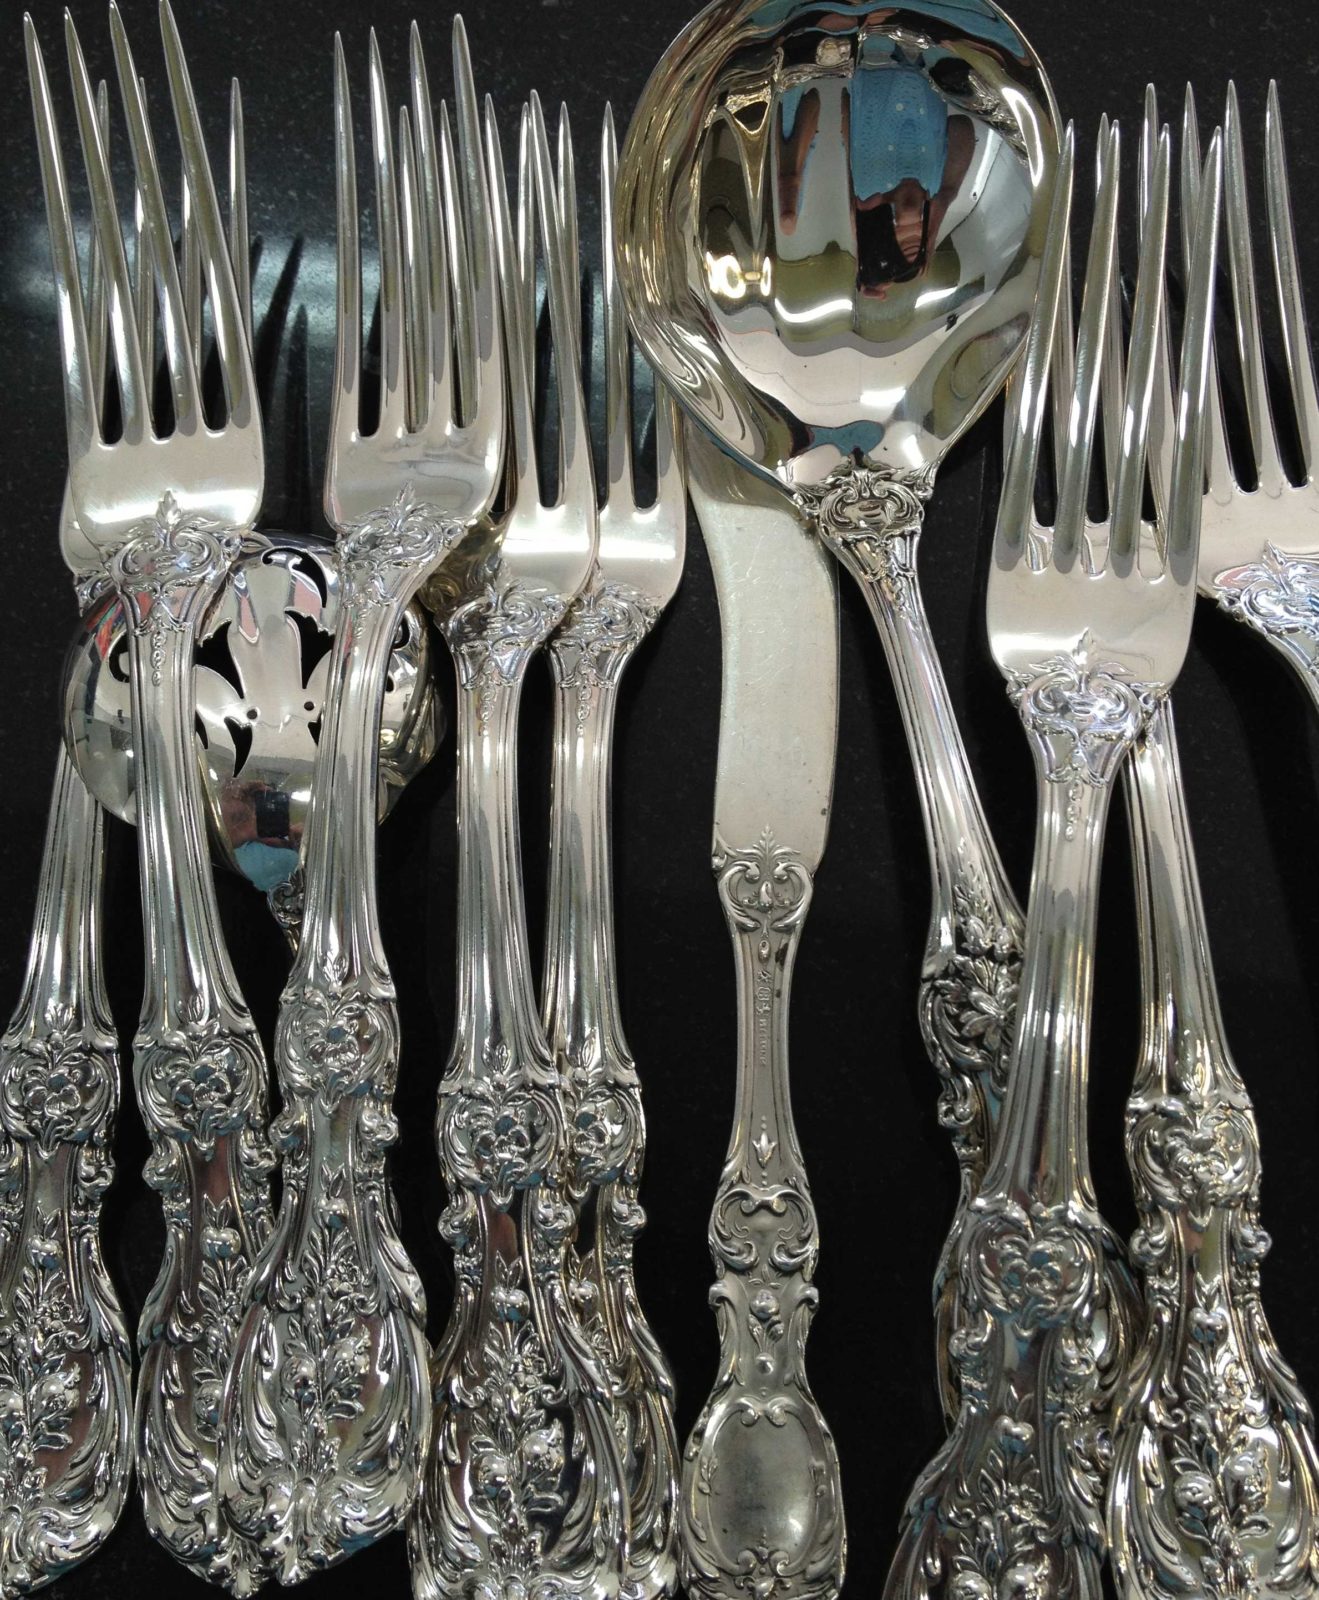 How Do You Know You Have Real Silver Silverware?